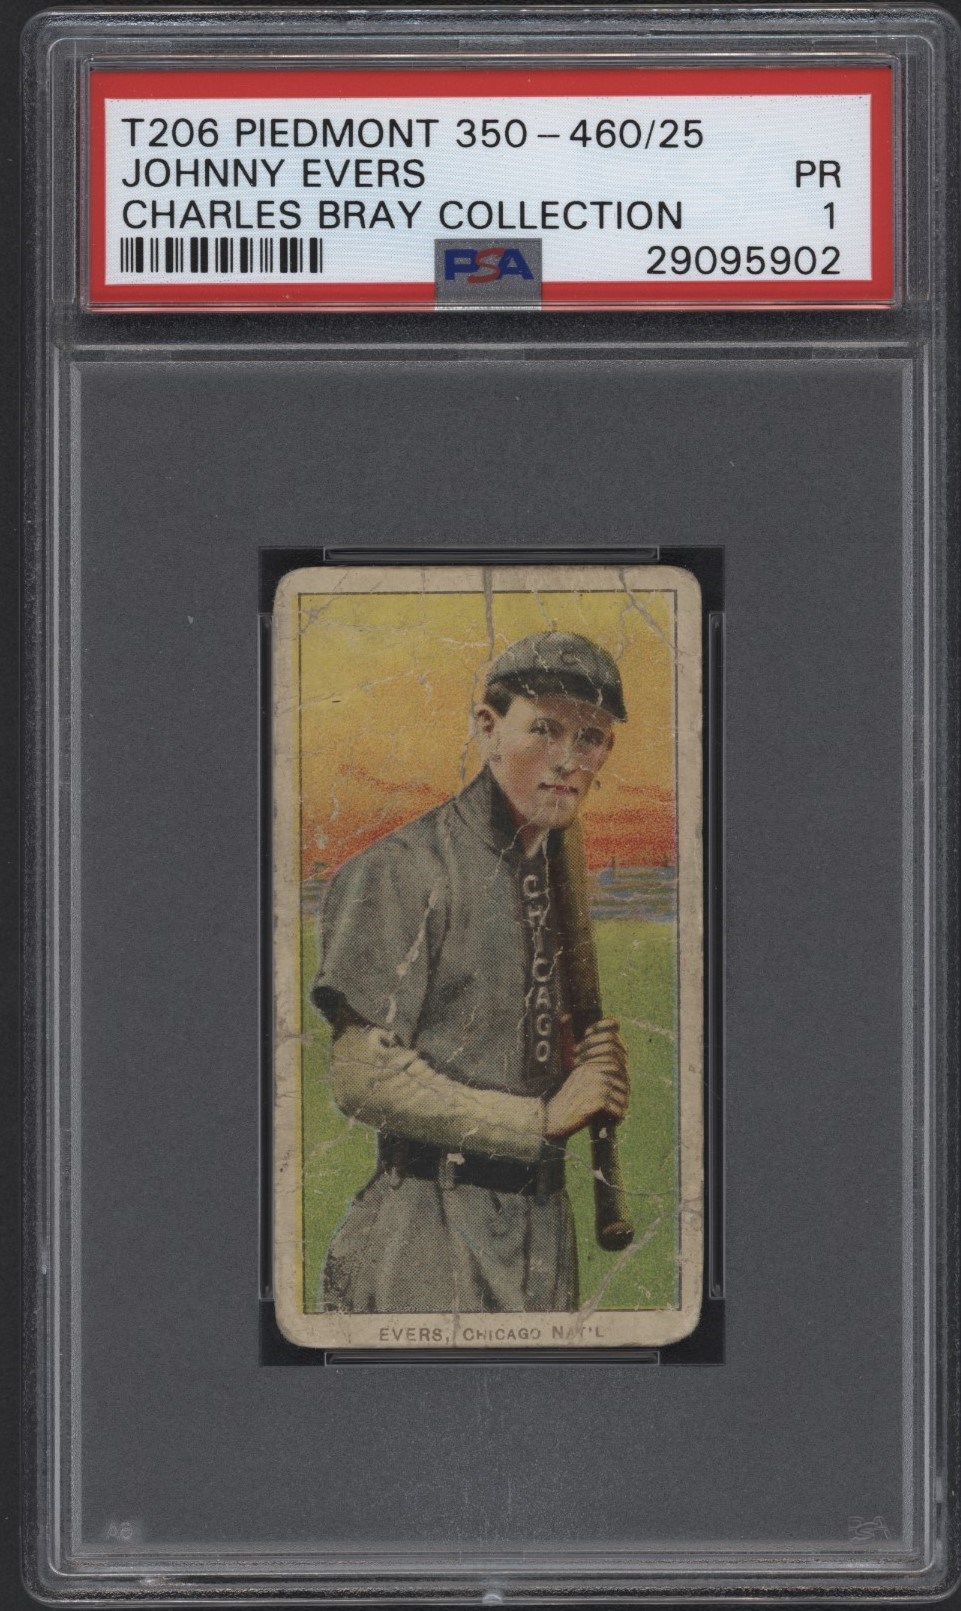 Baseball and Trading Cards - T206 Piedmont 350-460/25 Johnny Evers PSA 1 From the Charles Bray Collection